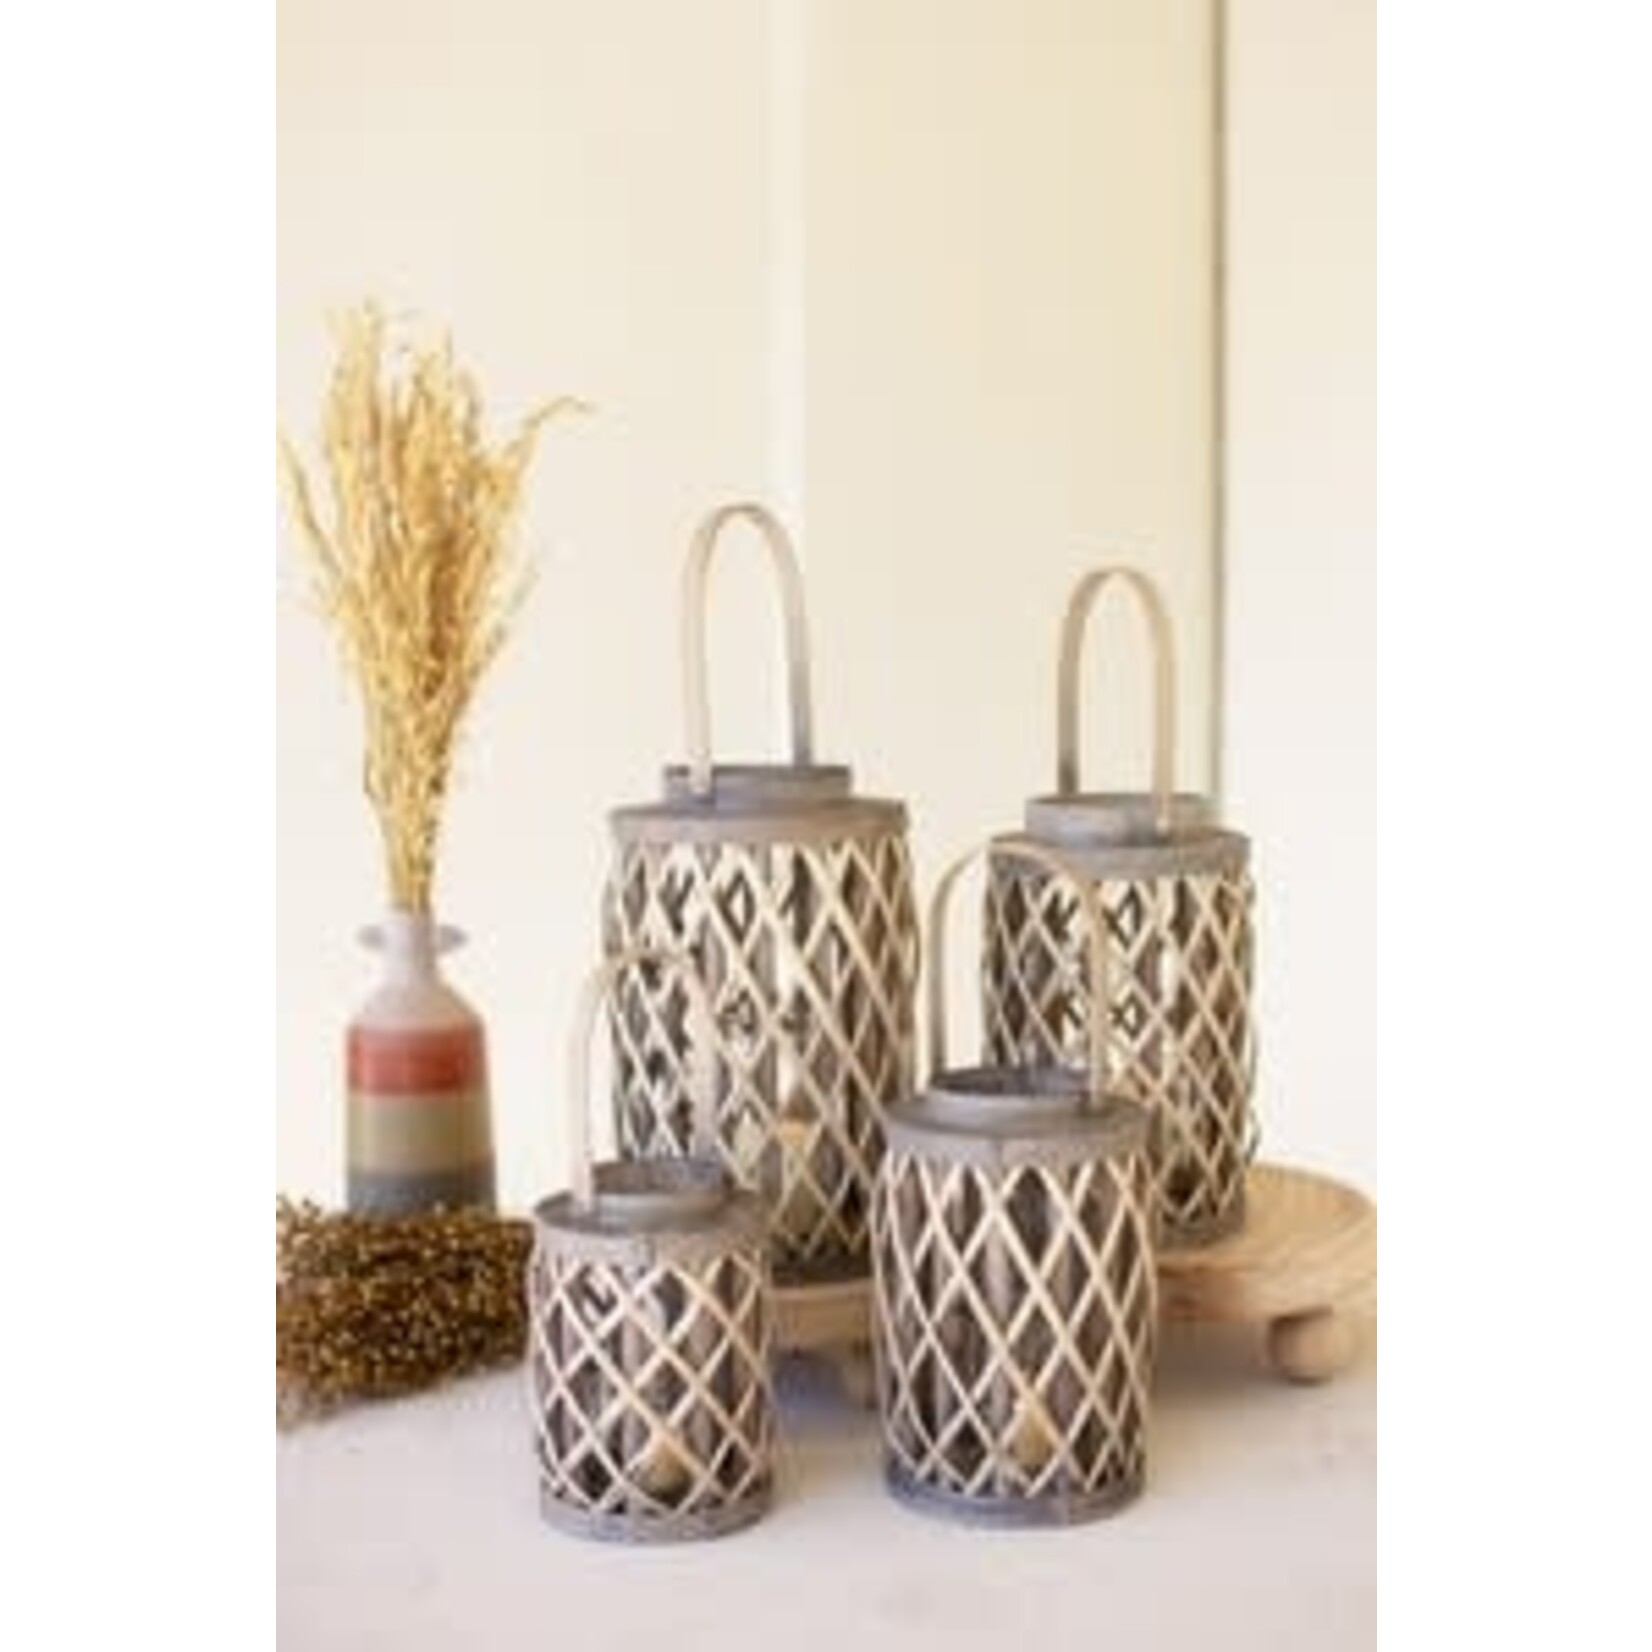 Grey Willow Cylinder Lantern with Glass Insert  XSmall